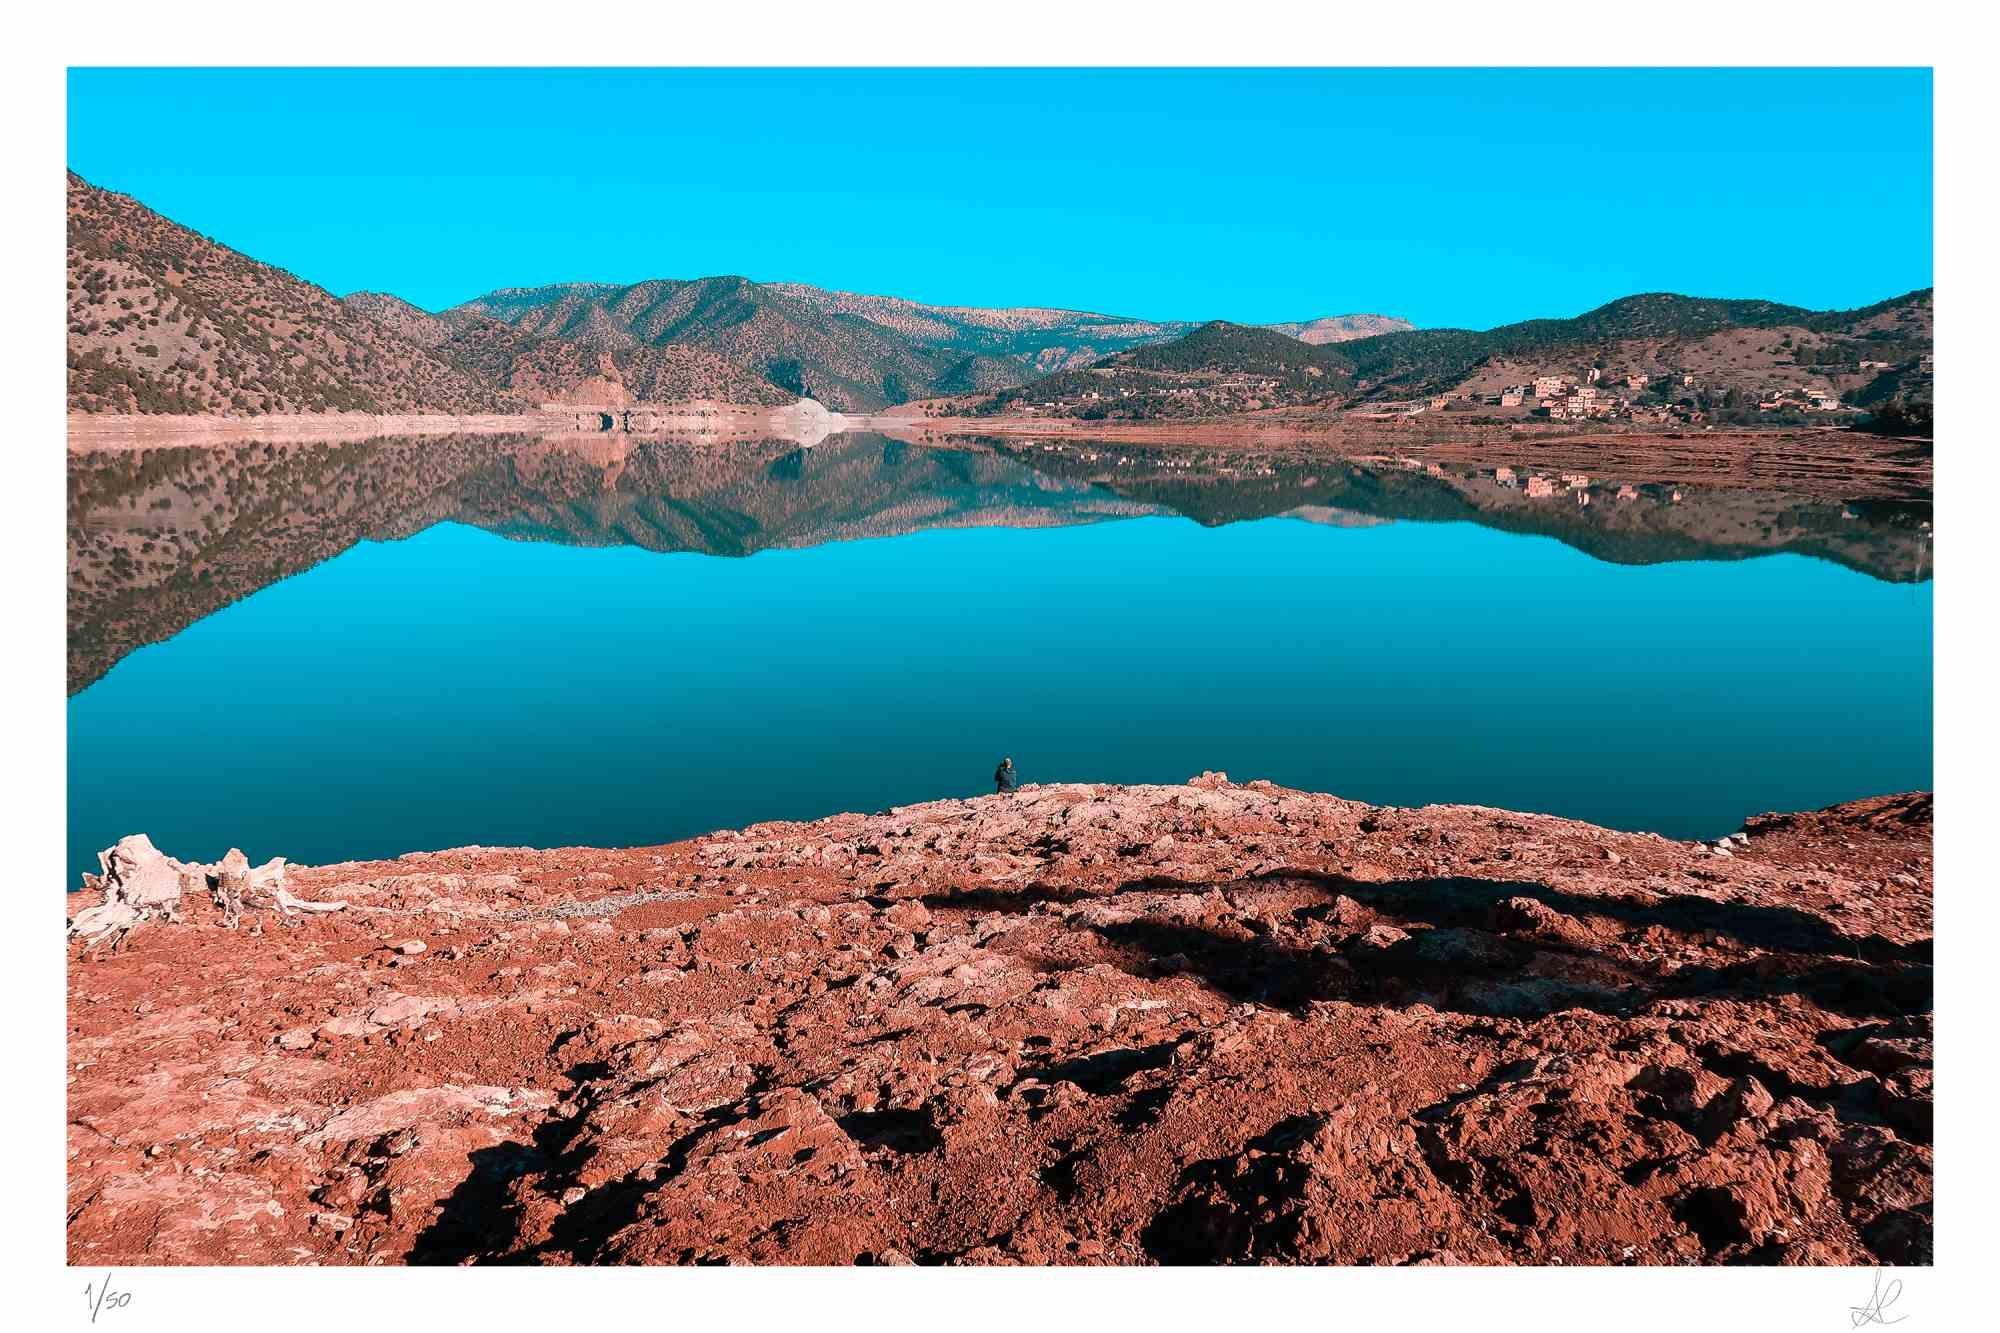 Morocco is a photograph taken by Amanda Ludovisi in 2018.

It represents an outstanding landscape within the Moroccan mountains. This is a giclée print on Canson Baryta Matt paper. Limited edition of 50 copies.

Monogrammed on the lower right and